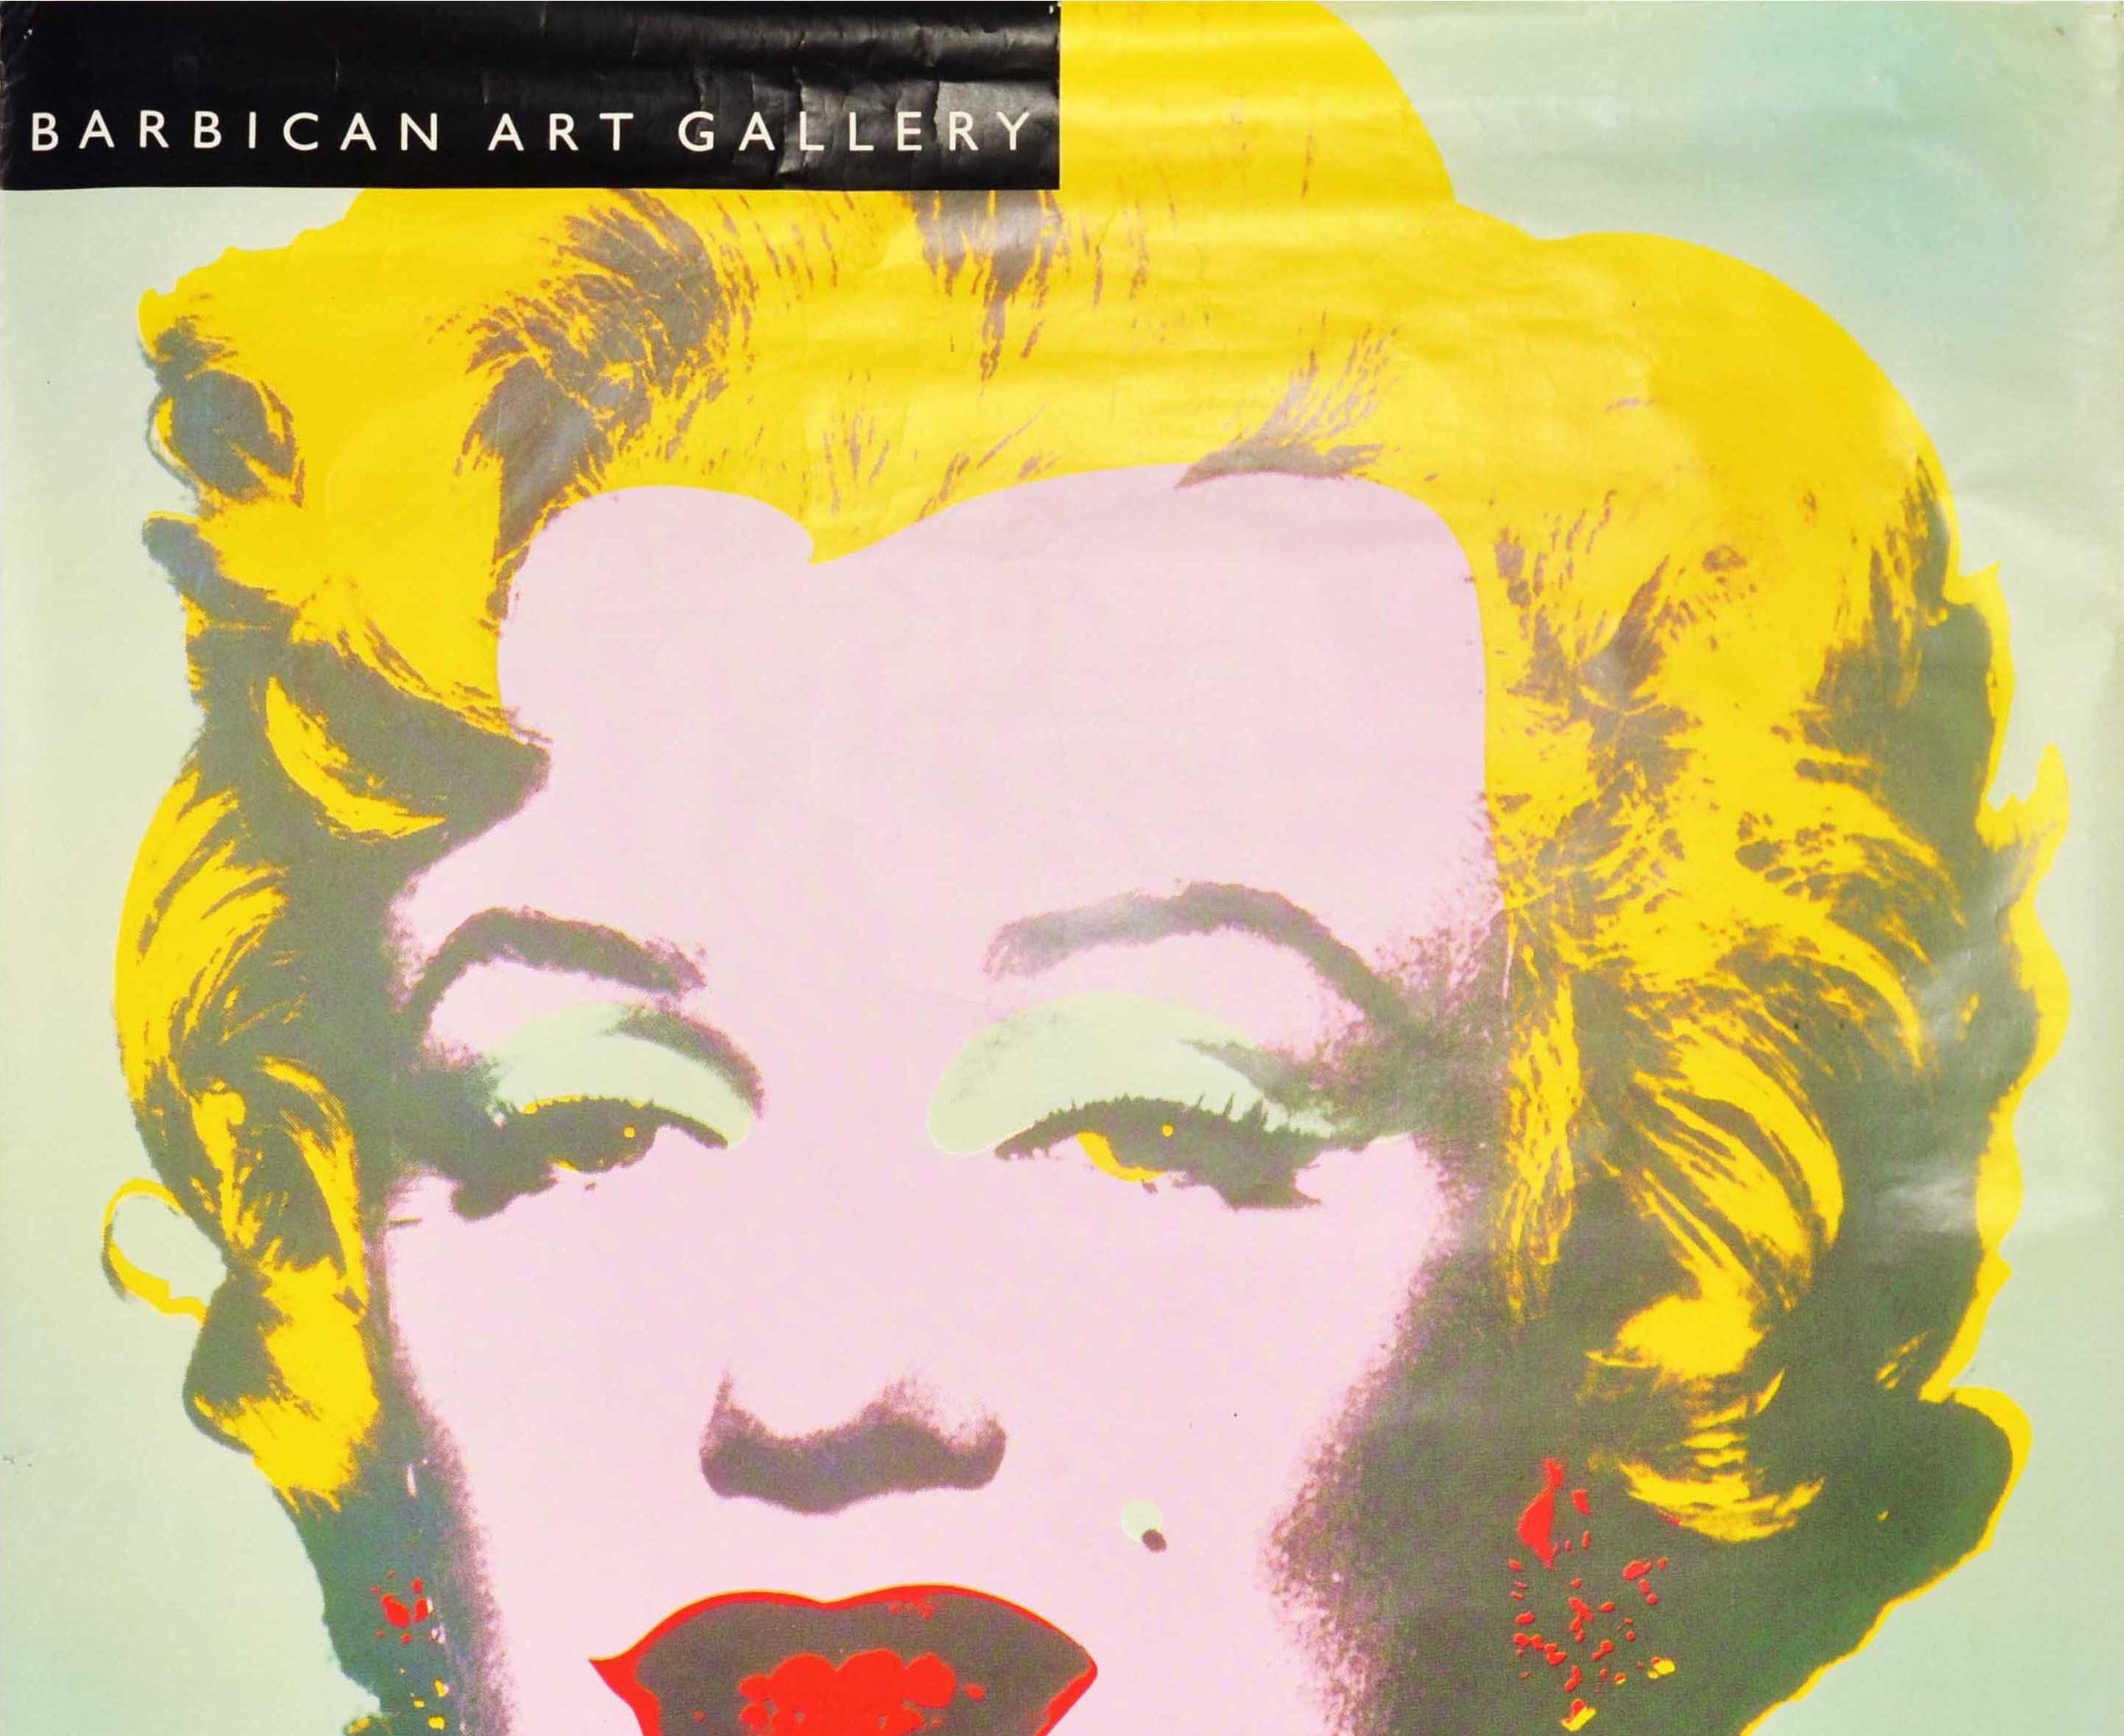 Original vintage advertising poster for an exhibition at the Barbican Art Gallery - The Warhol Look Glamour - from 28 May to 16 August 1998, featuring the iconic 1960s pop art design by the notable artist Andy Warhol (1928-1987) showing a colourful